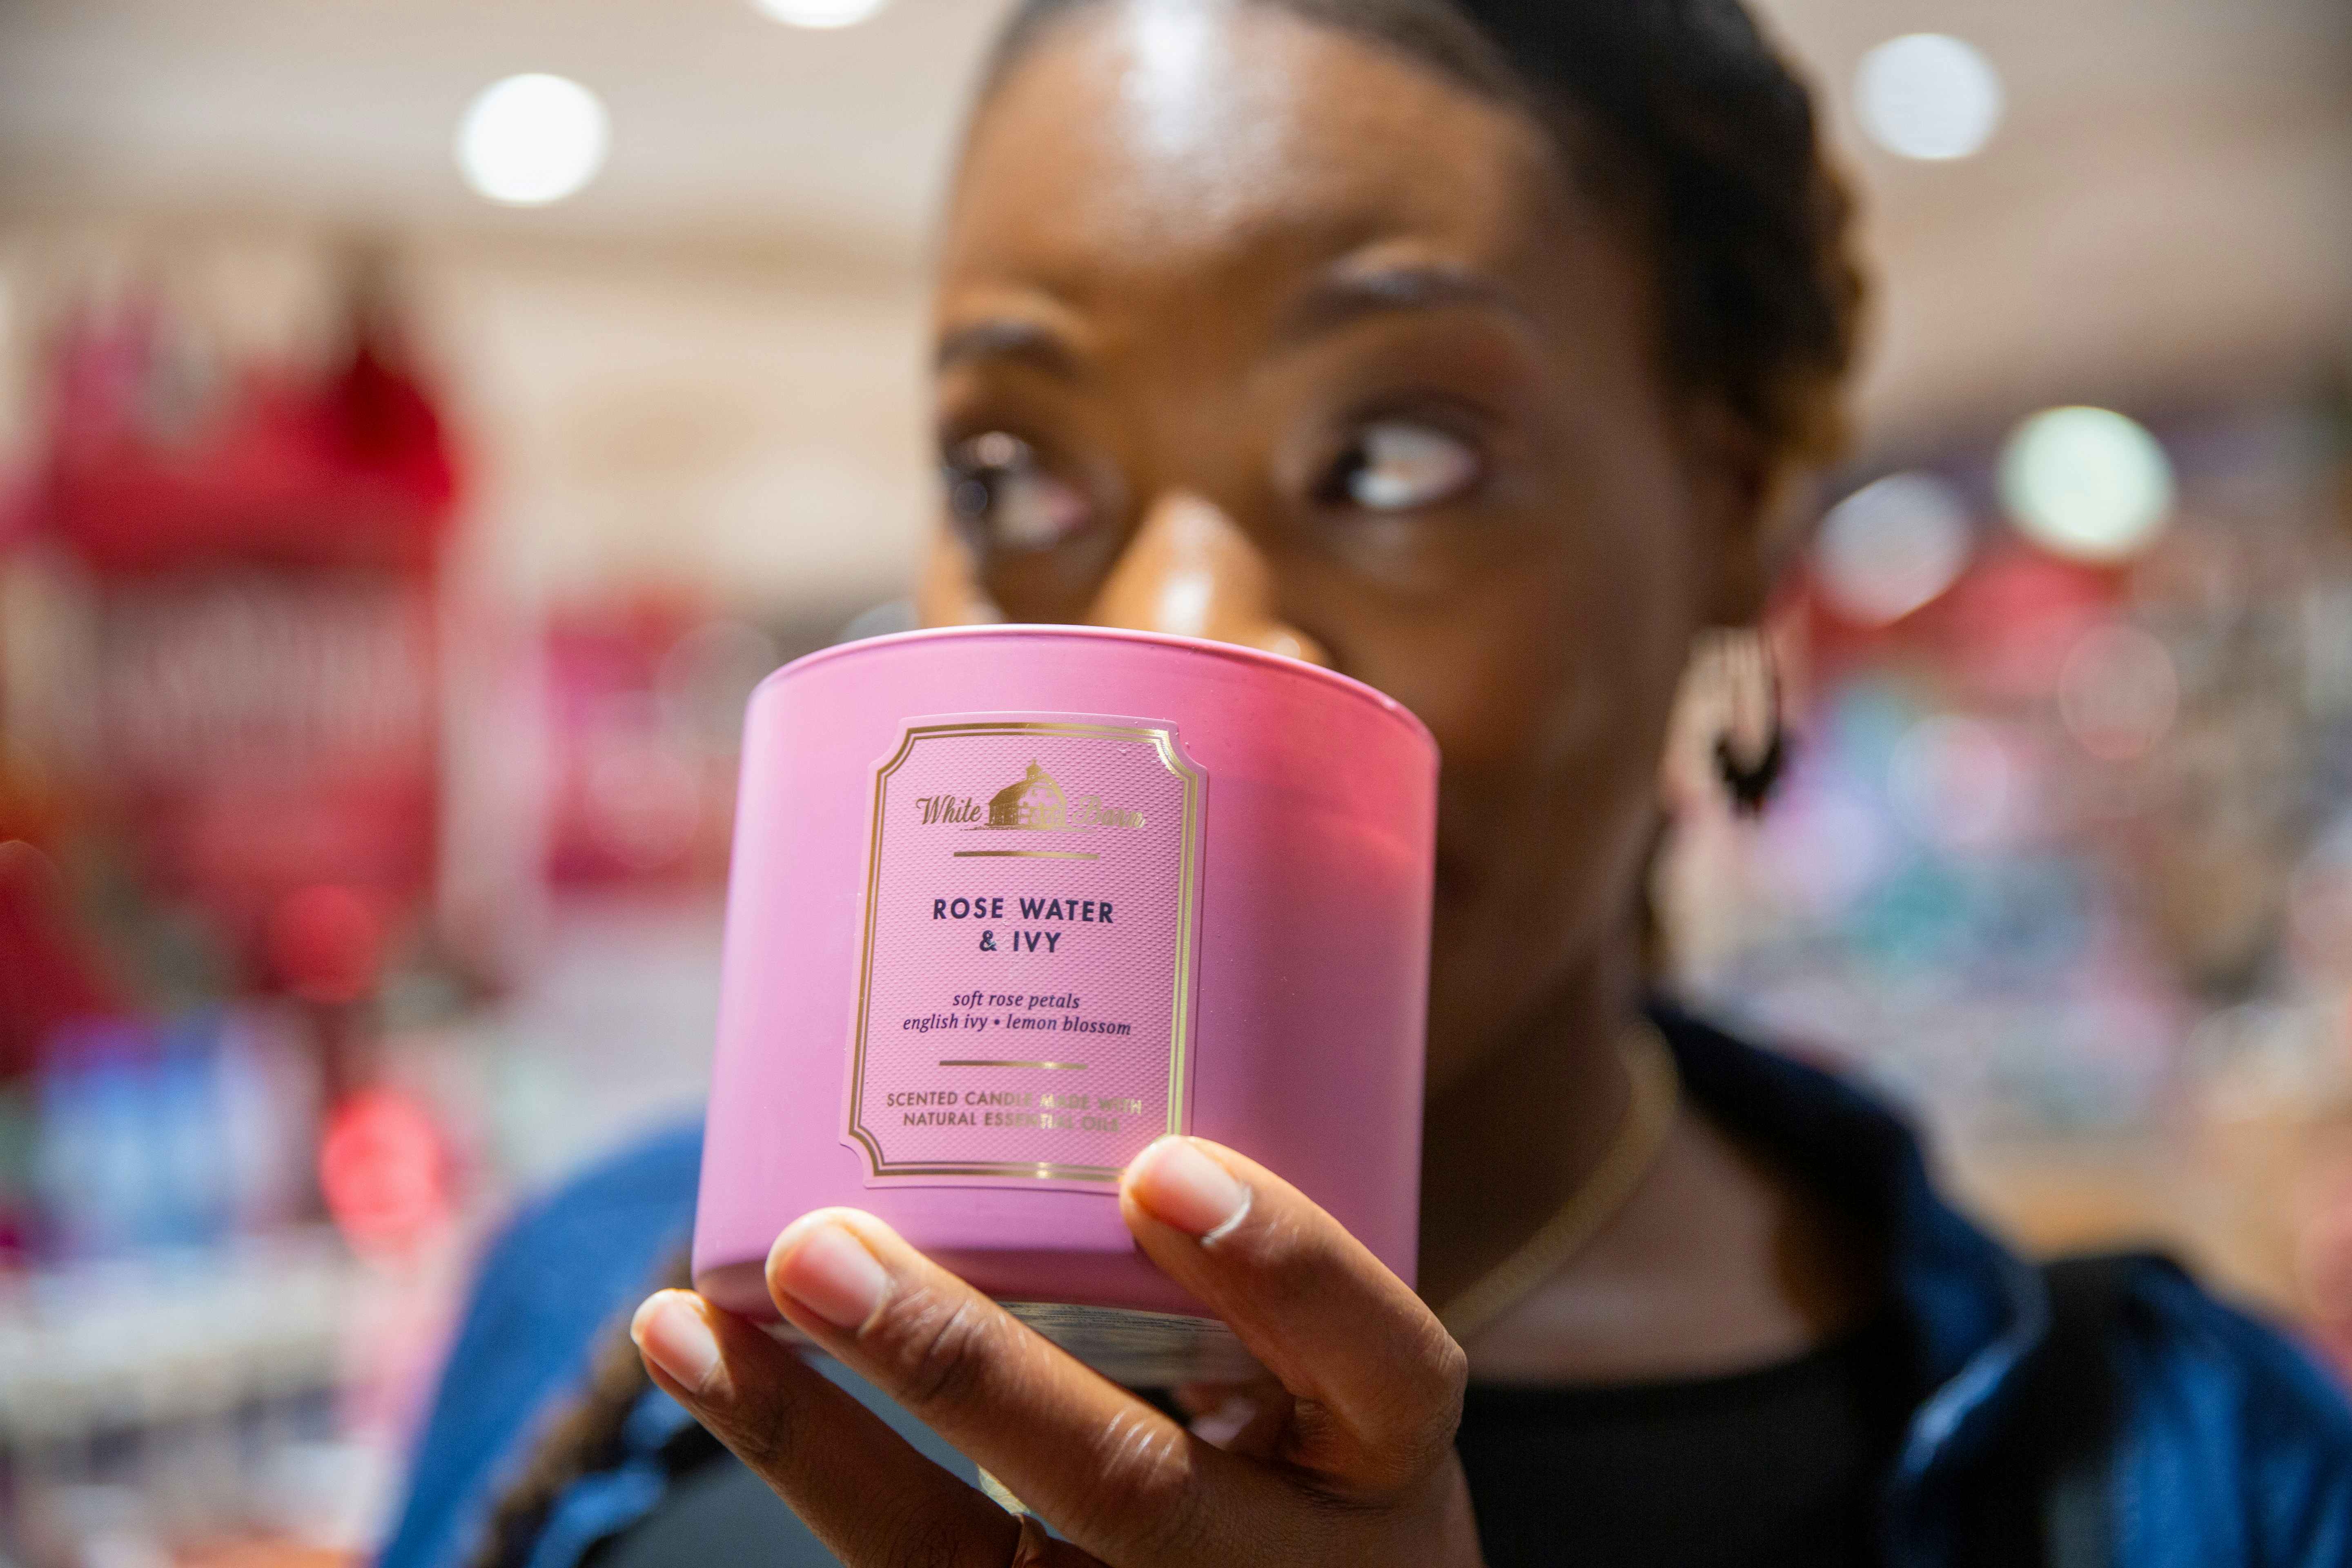 Person holding up a pink candle from Bath and Body works to their nose to smell